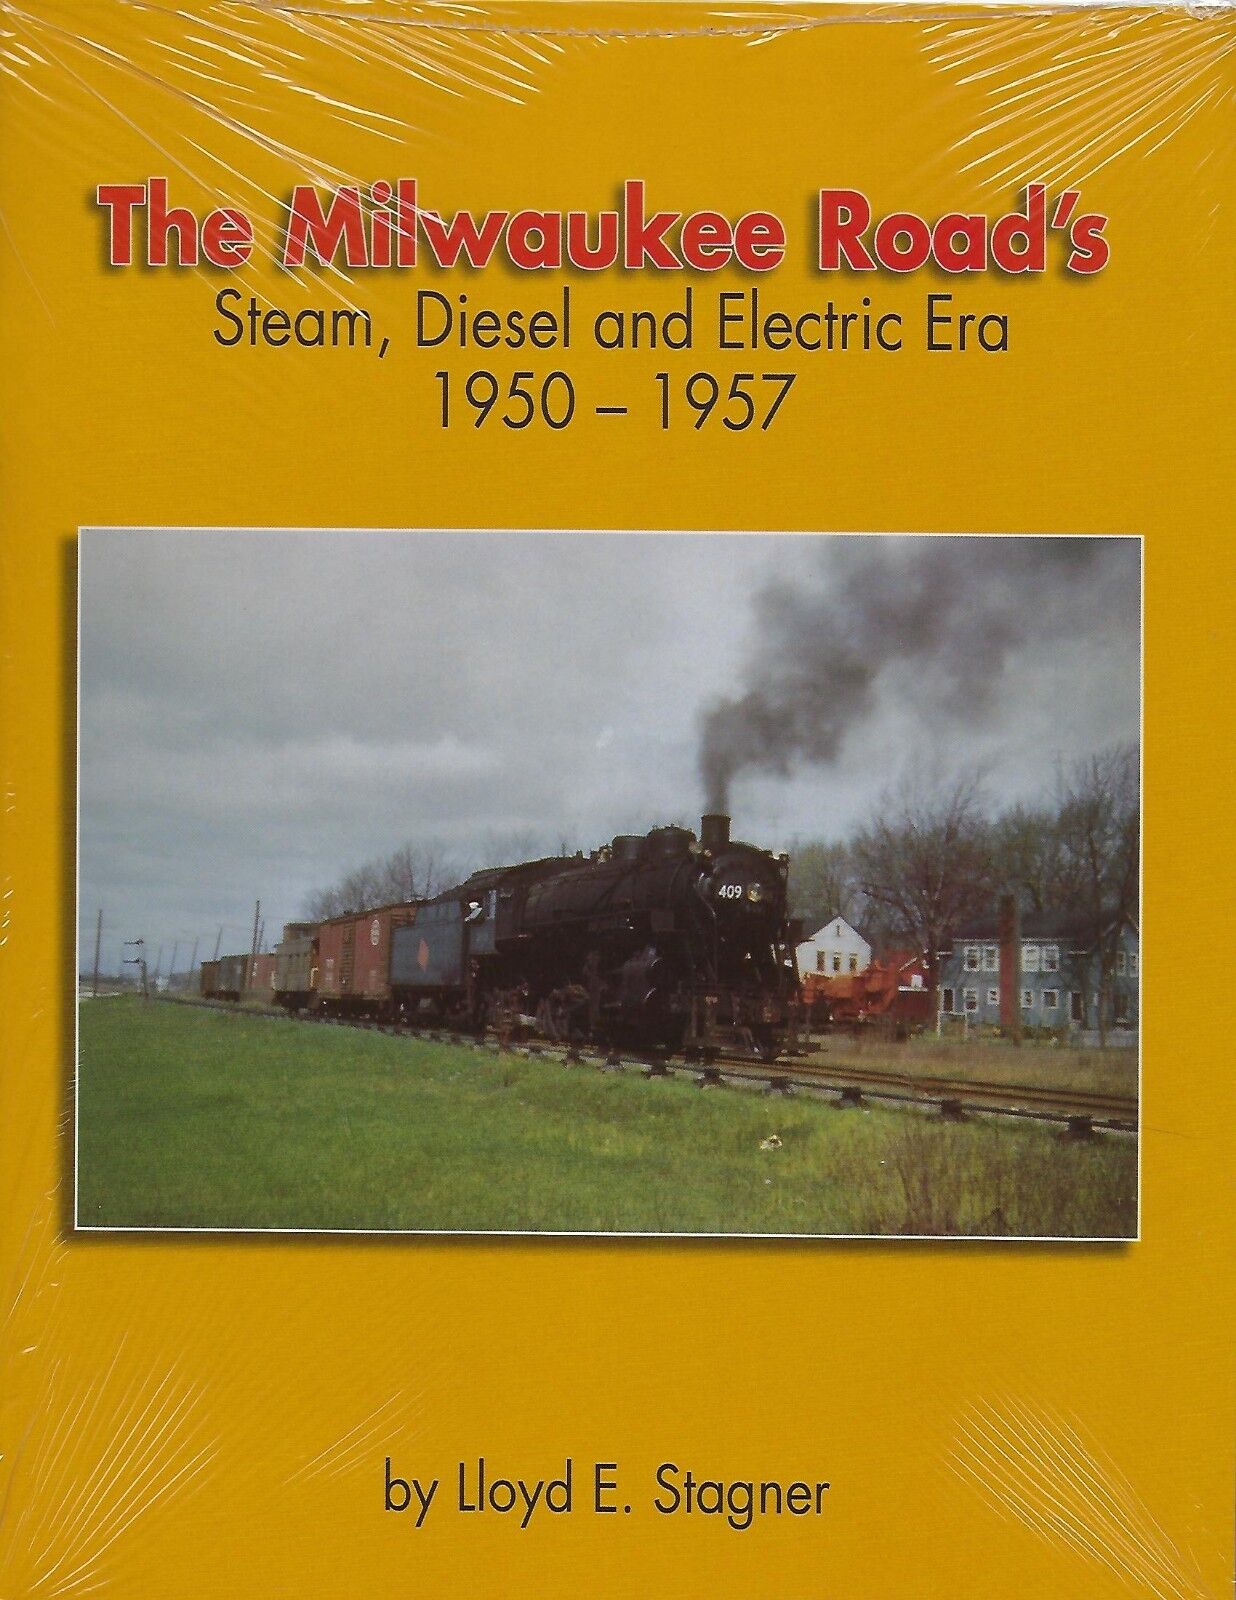 The Milwaukee Road\'s STEAM, DIESEL and ELECTRIC ERA, 1950-1957 (BRAND NEW BOOK)